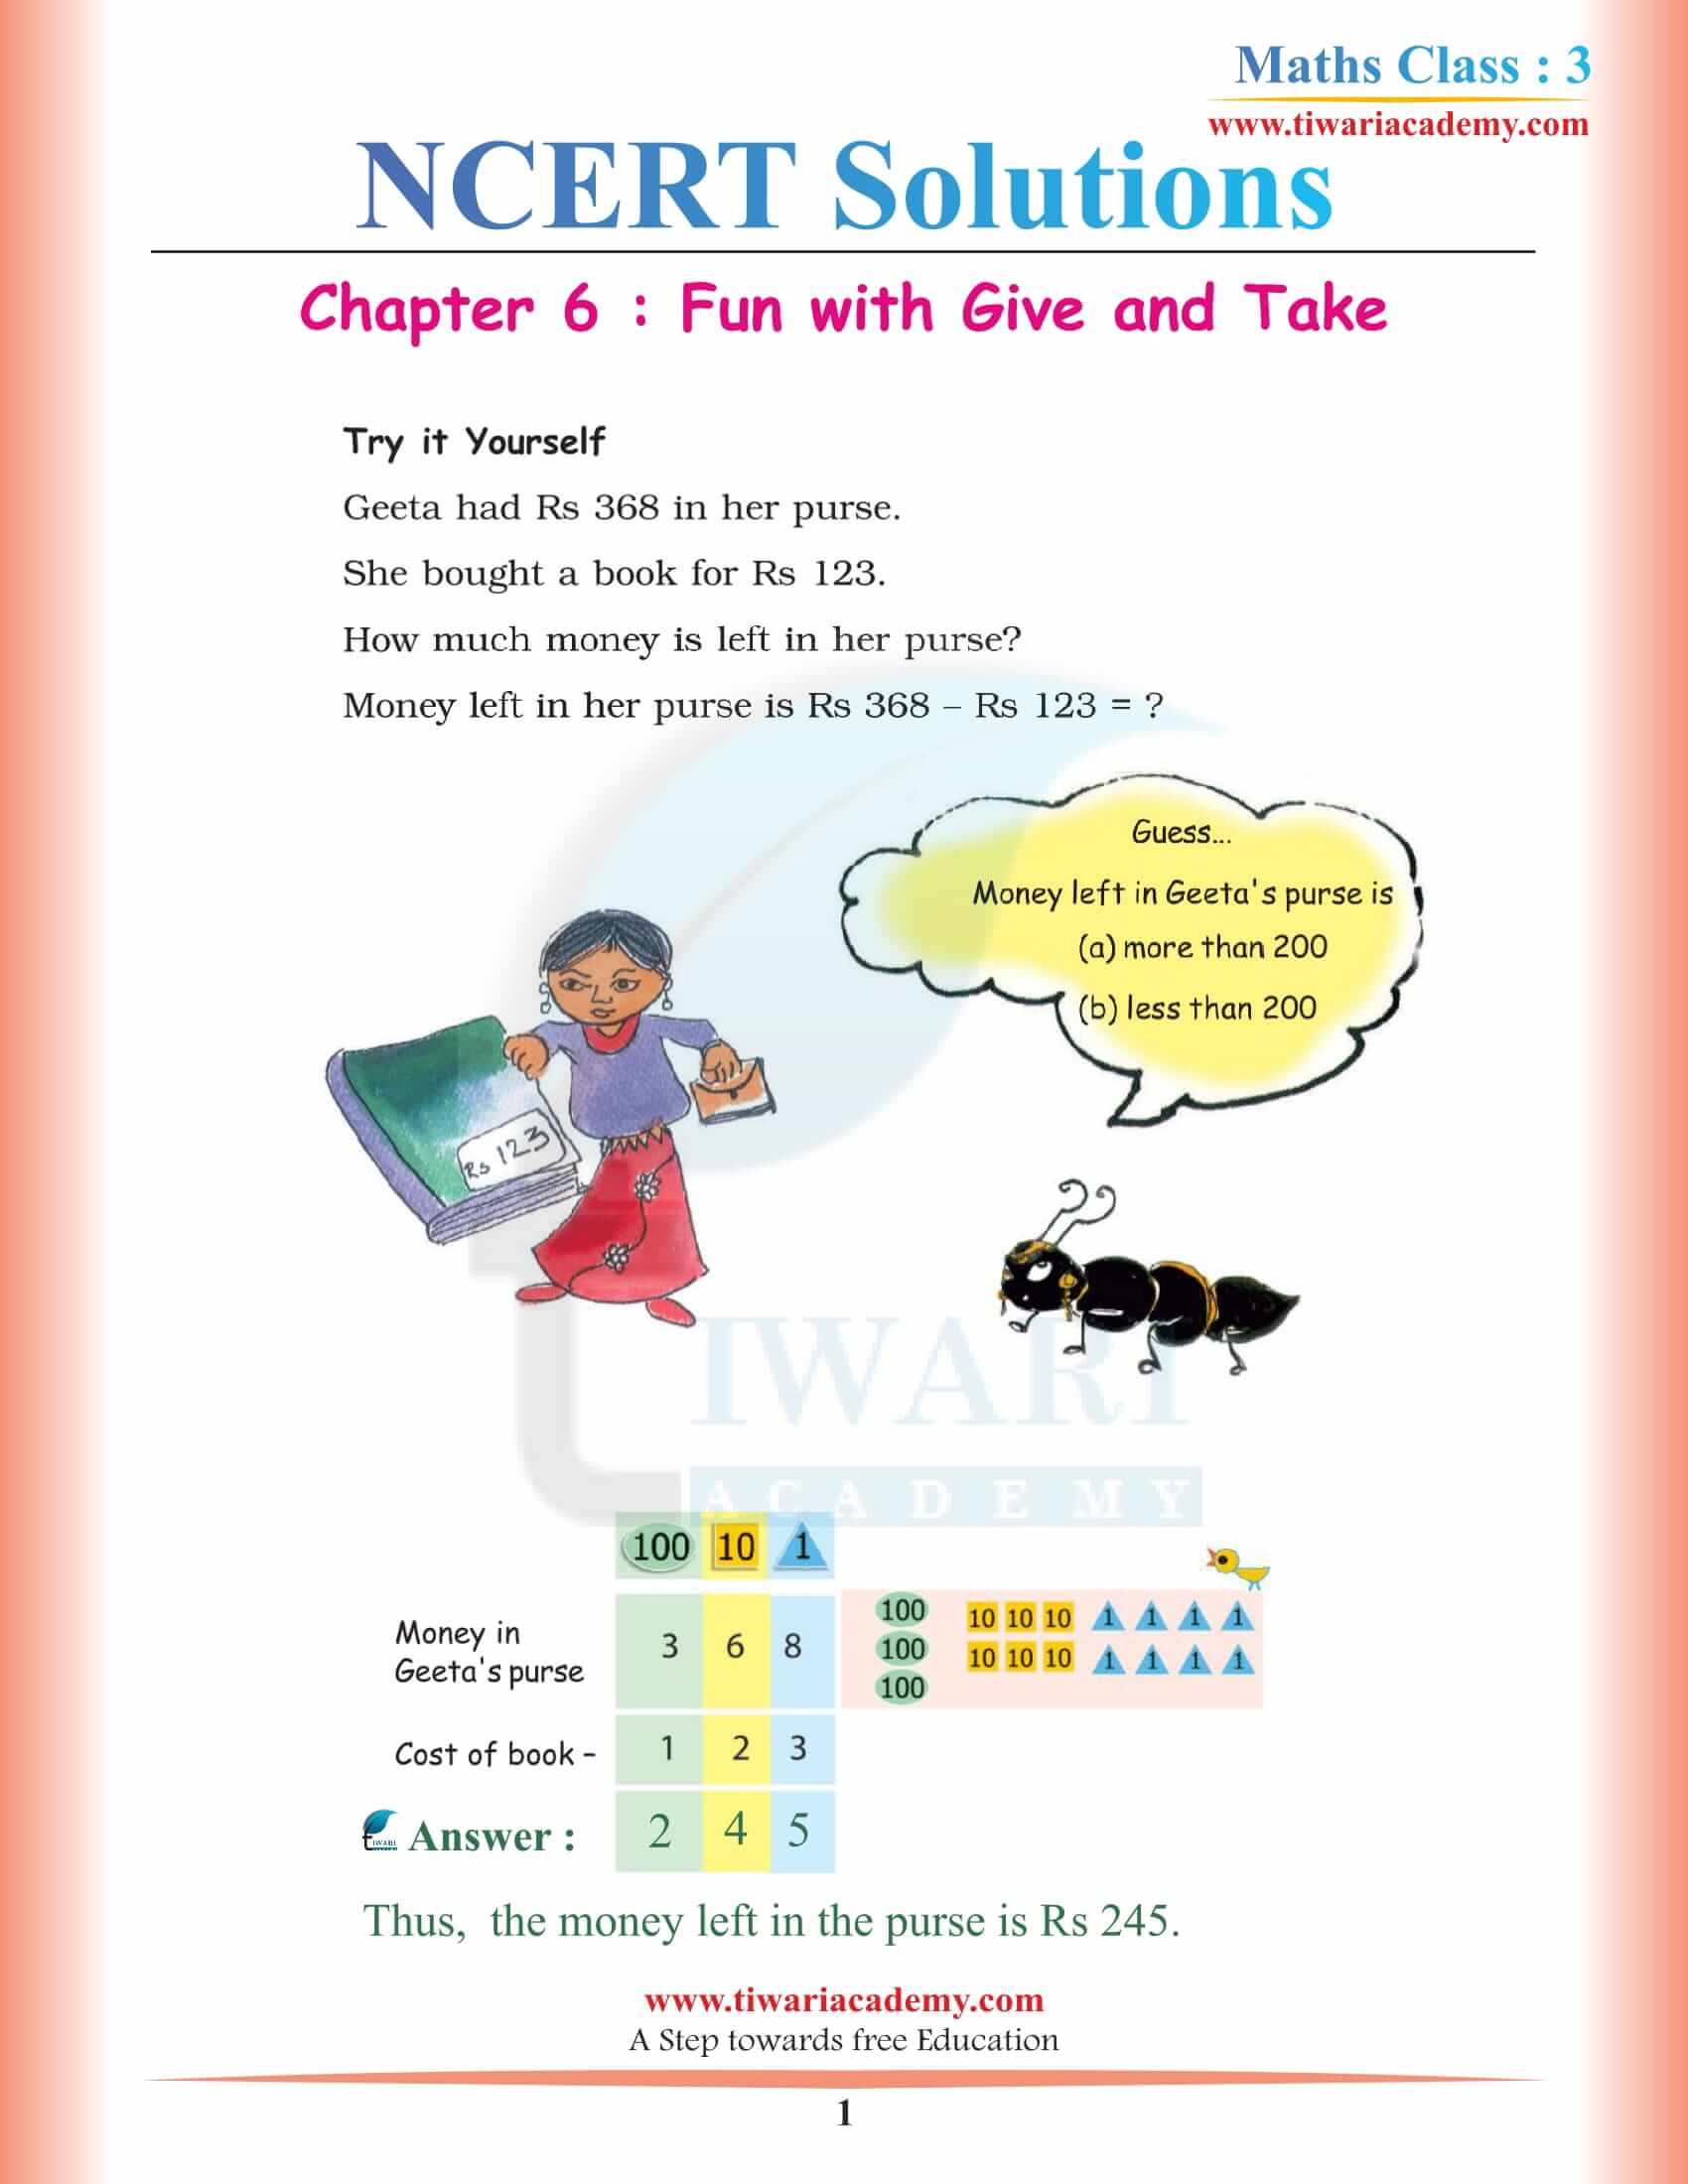 NCERT Solutions for Class 3 Maths Chapter 6 Fun with Give and Take